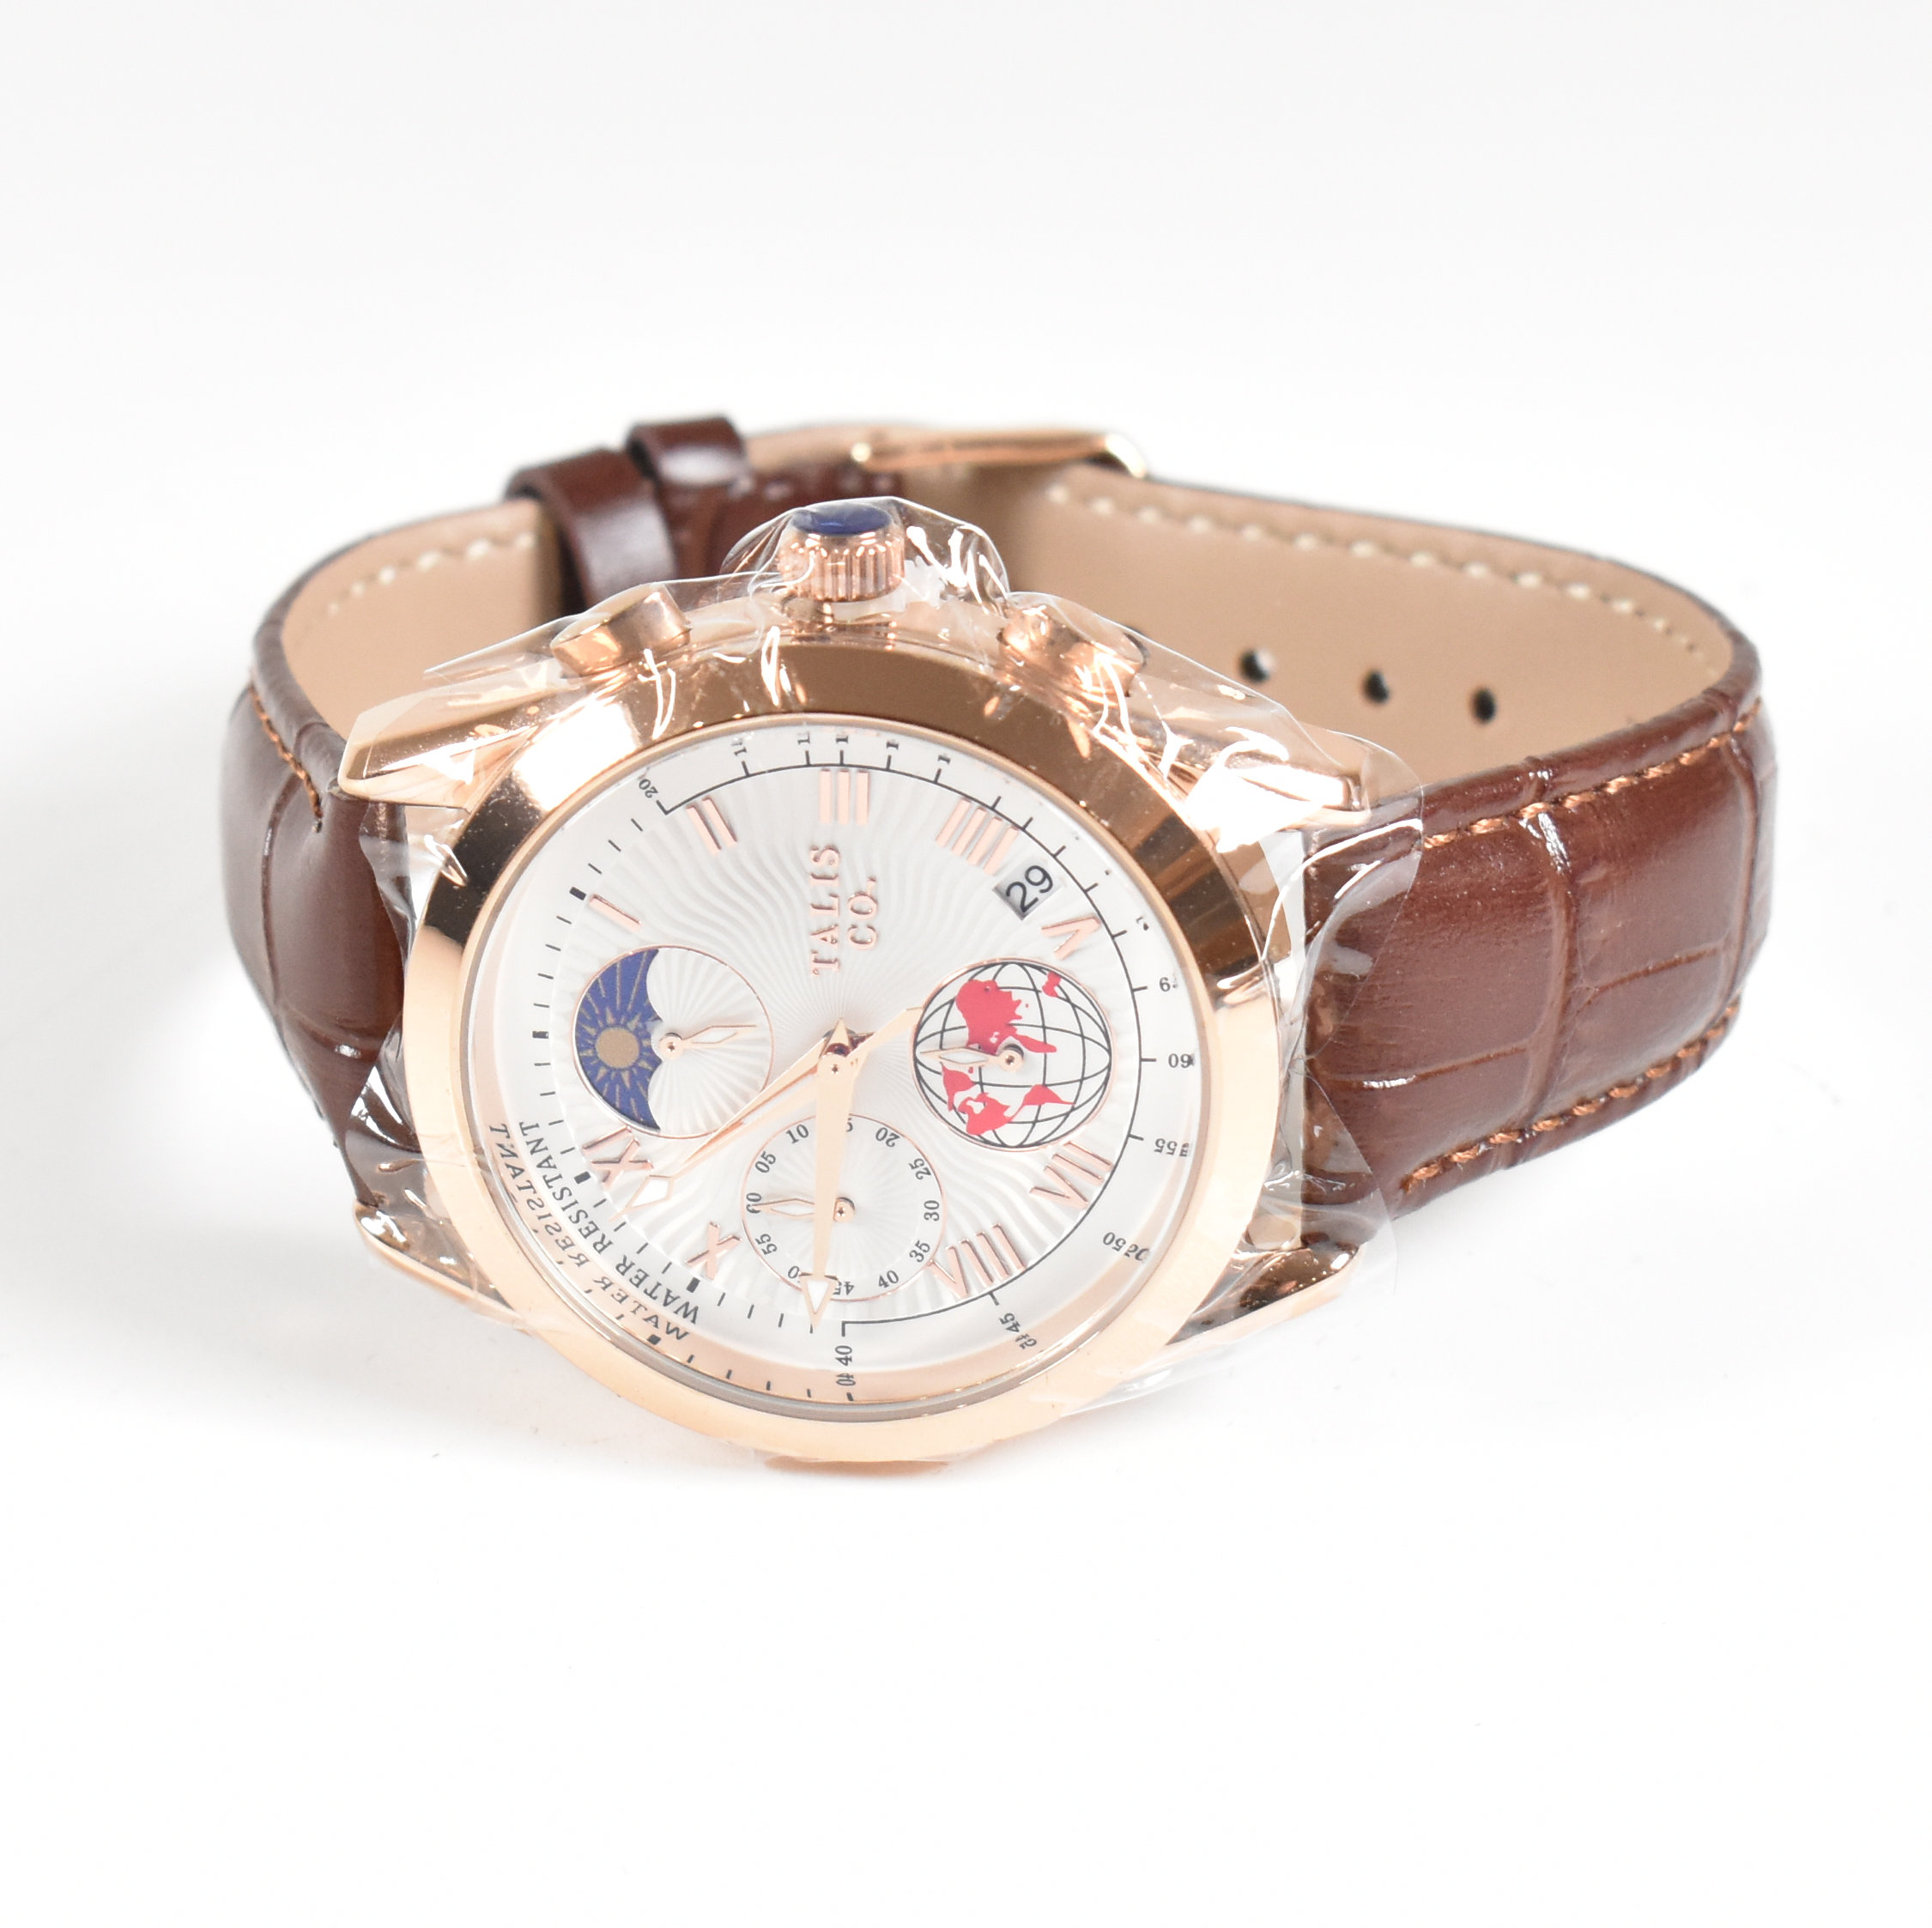 MENS TALIS CO 7120 CHRONOGRAPH WRIST WATCH - Image 3 of 7